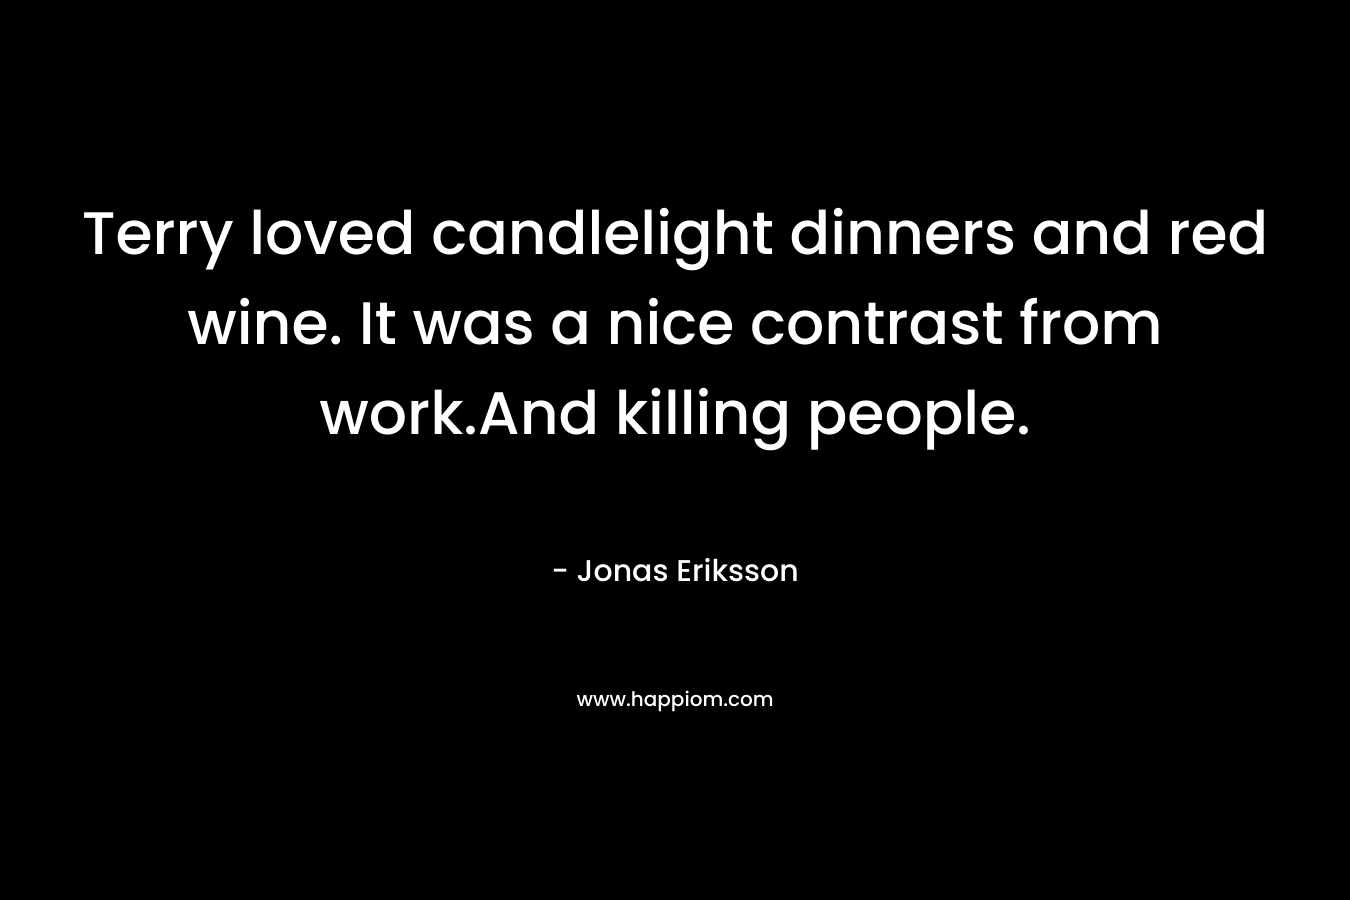 Terry loved candlelight dinners and red wine. It was a nice contrast from work.And killing people. – Jonas Eriksson